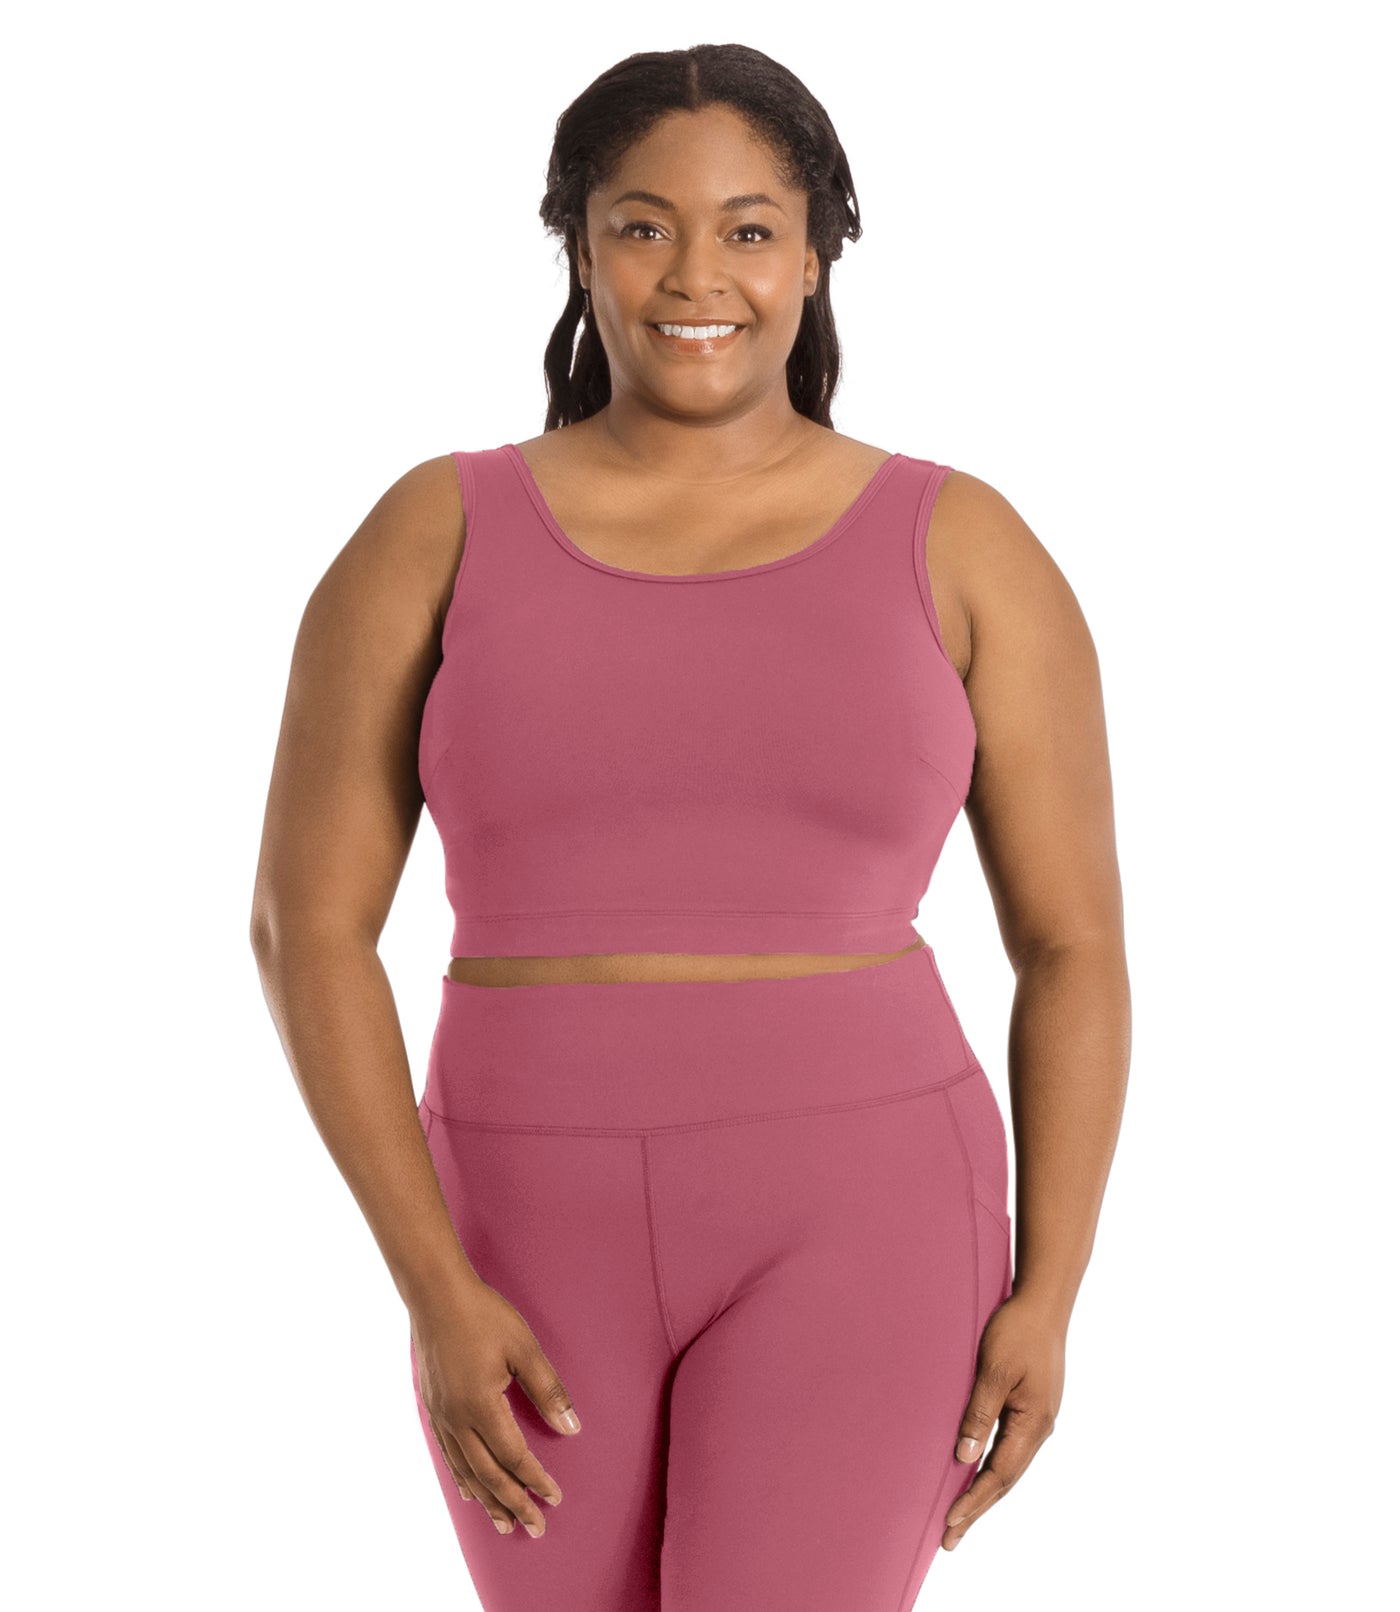 Plus size woman, facing front, wearing JunoActive plus size JunoStretch Scoop Bra in mauve. The woman is wearing black plus size JunoActive leggings. Her arms fall naturally to her side with her hands on her thighs.